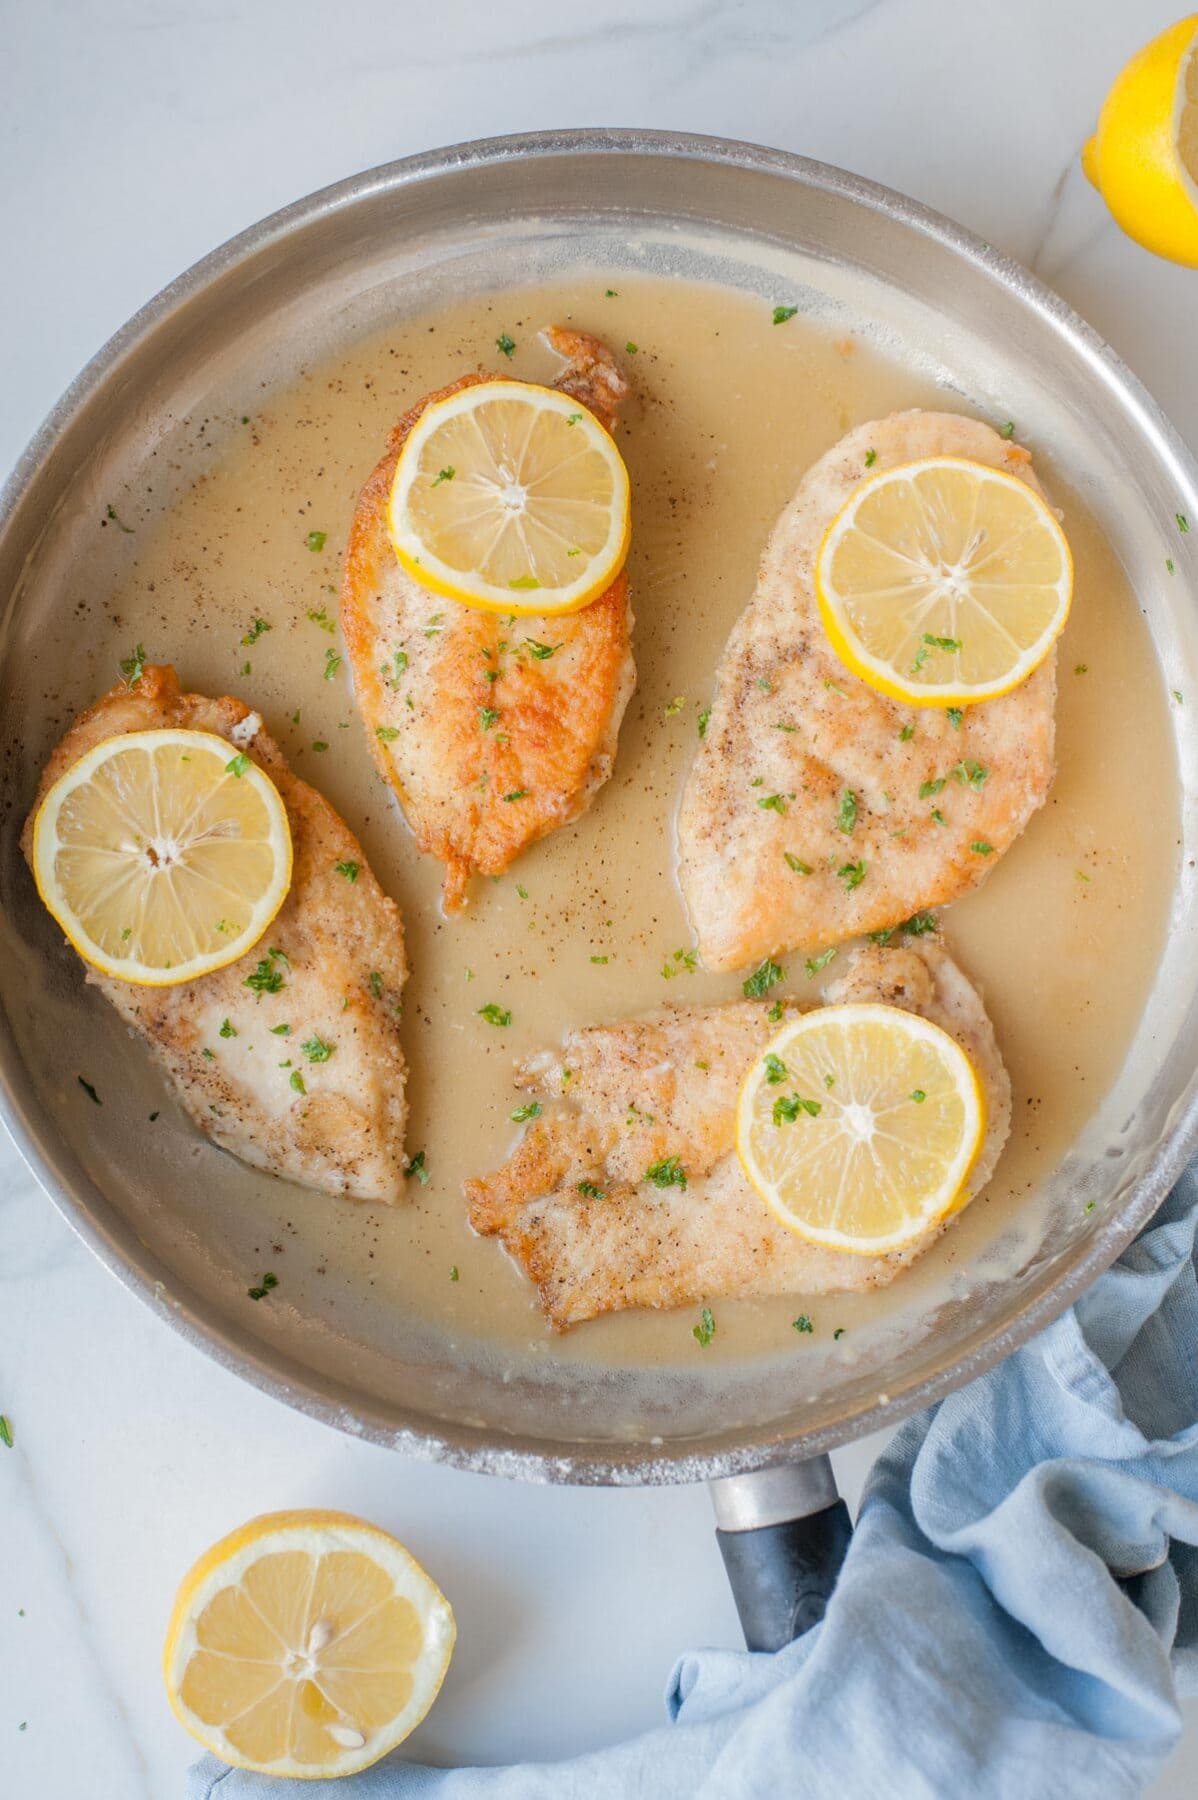 Pan-fried chicken fillets with lemon butter sauce topped with lemon slices in a frying pan.